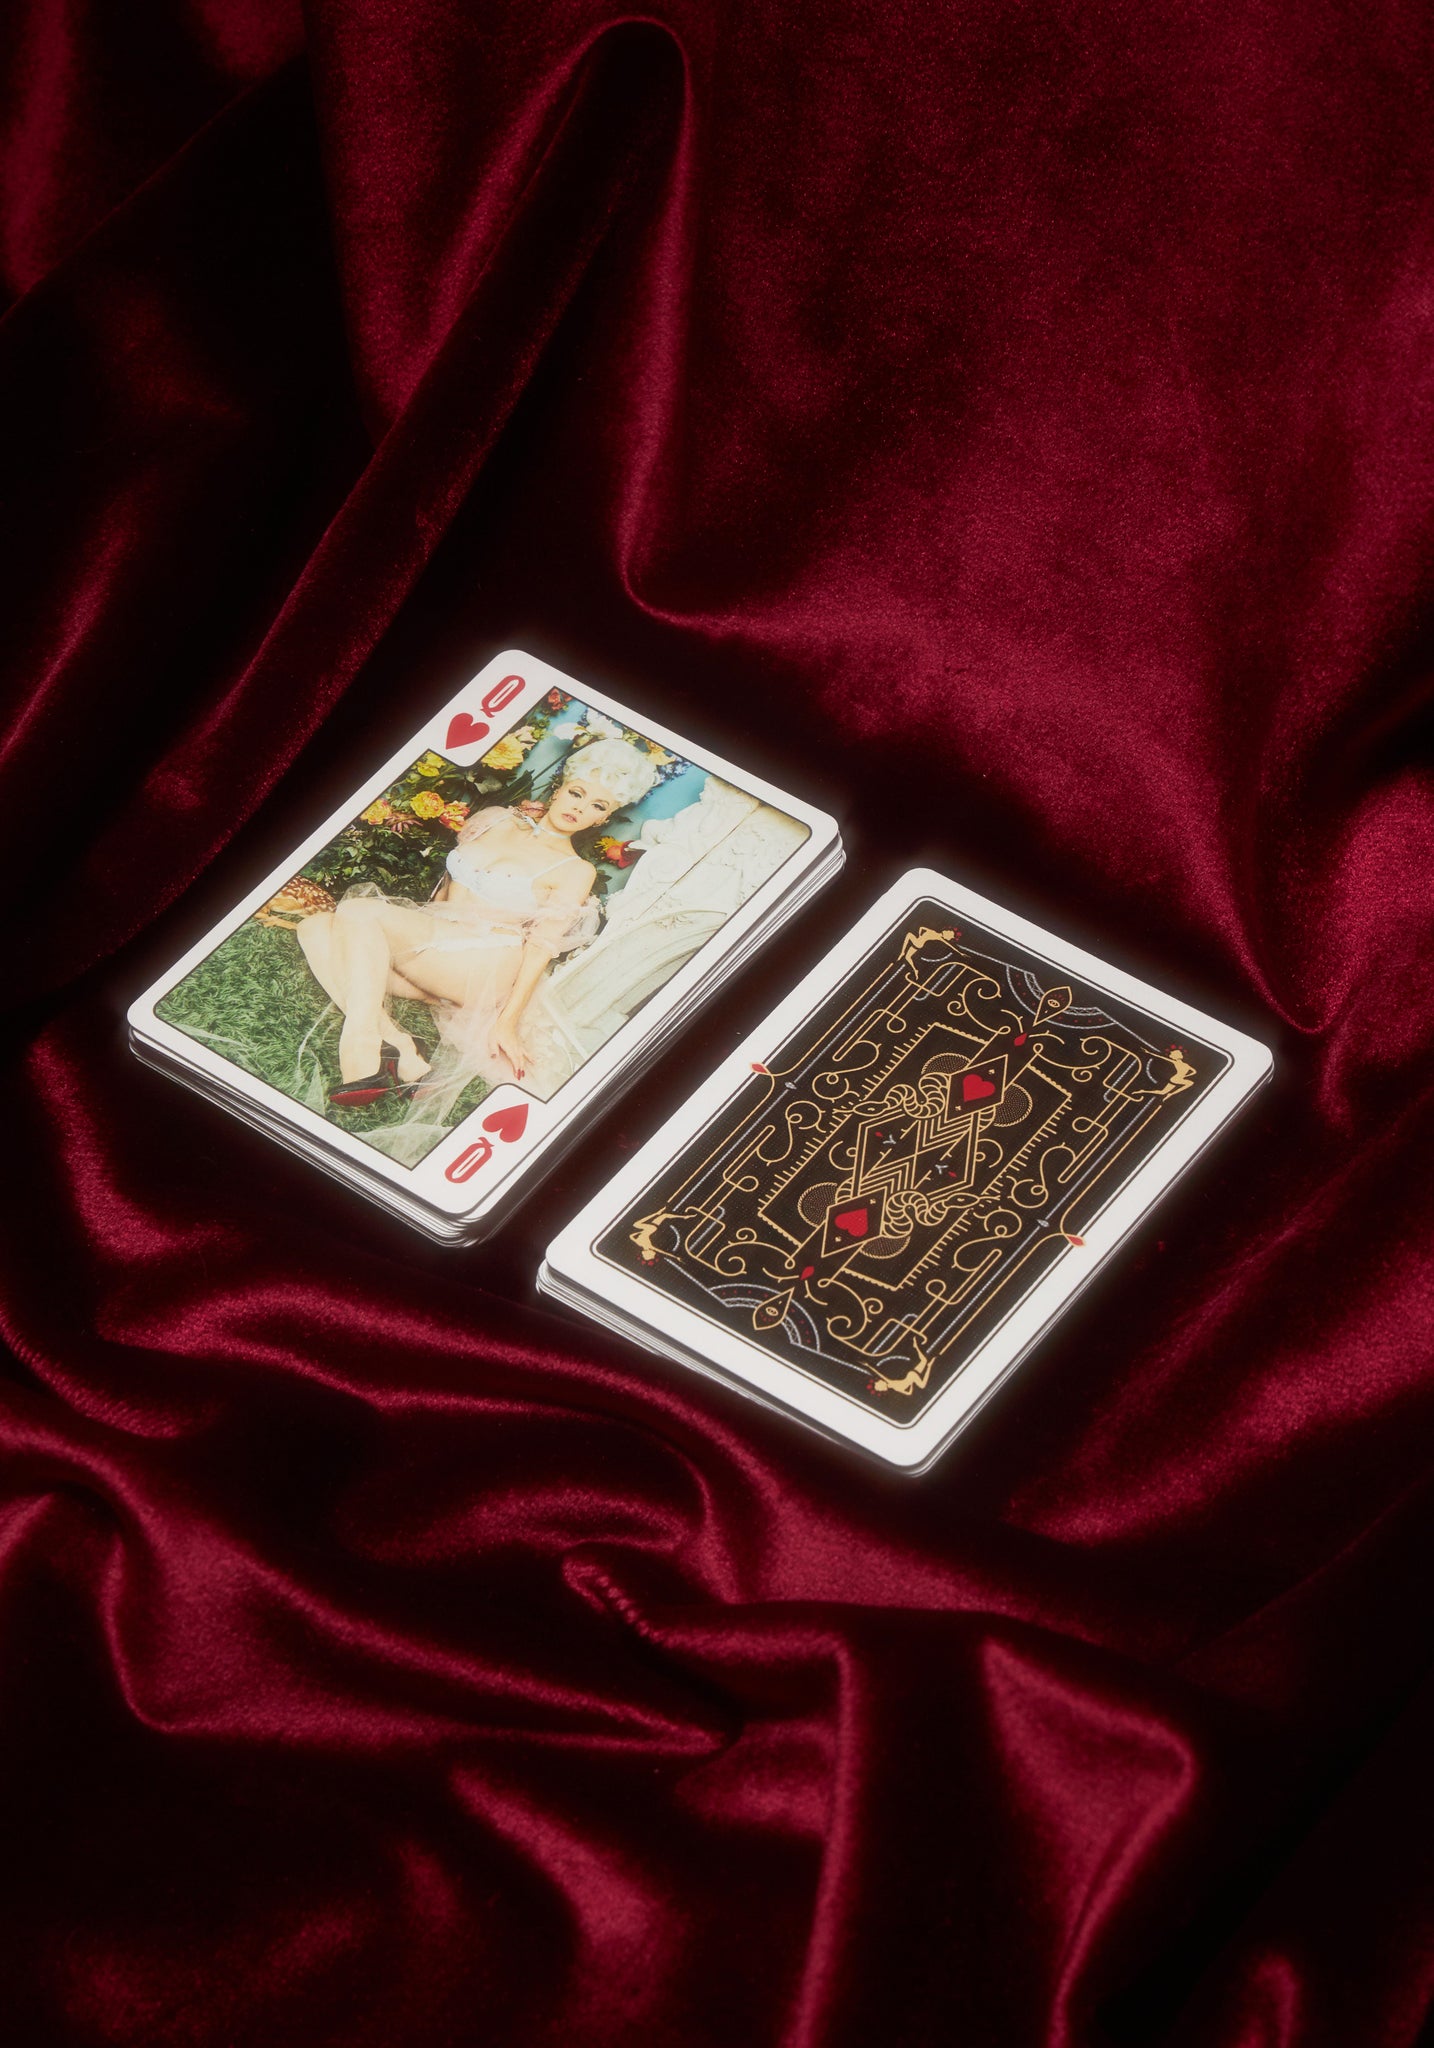 "His & Hers" Gartered Playing Cards